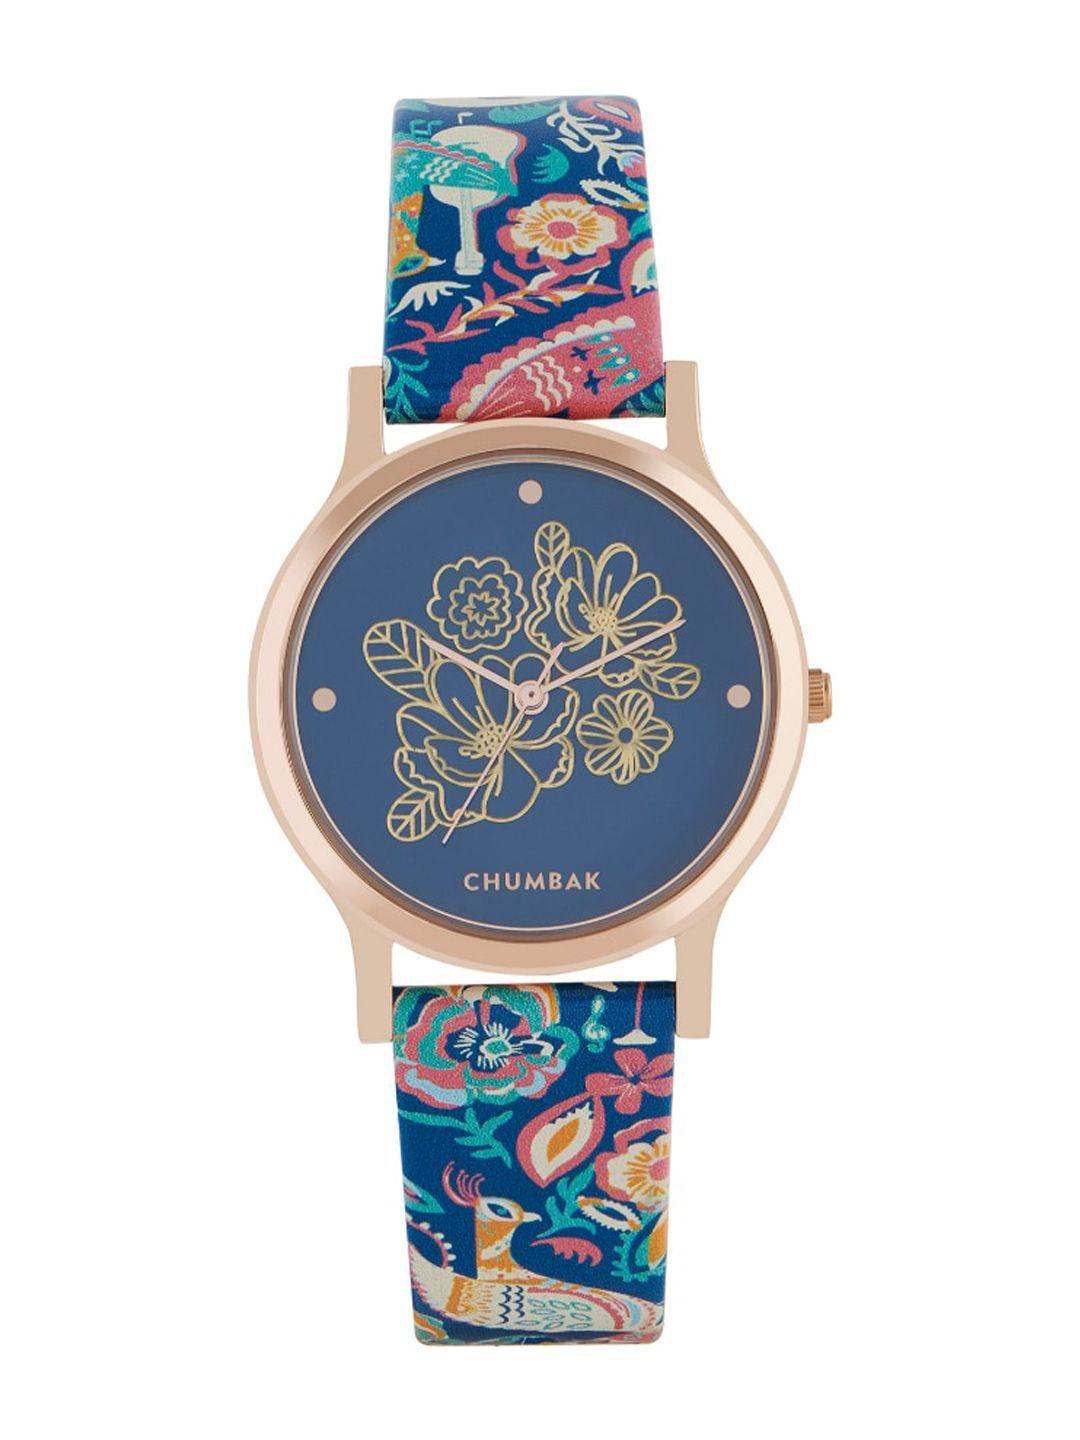 teal by chumbak women brass embellished dial & leather straps analogue watch 8907605119101